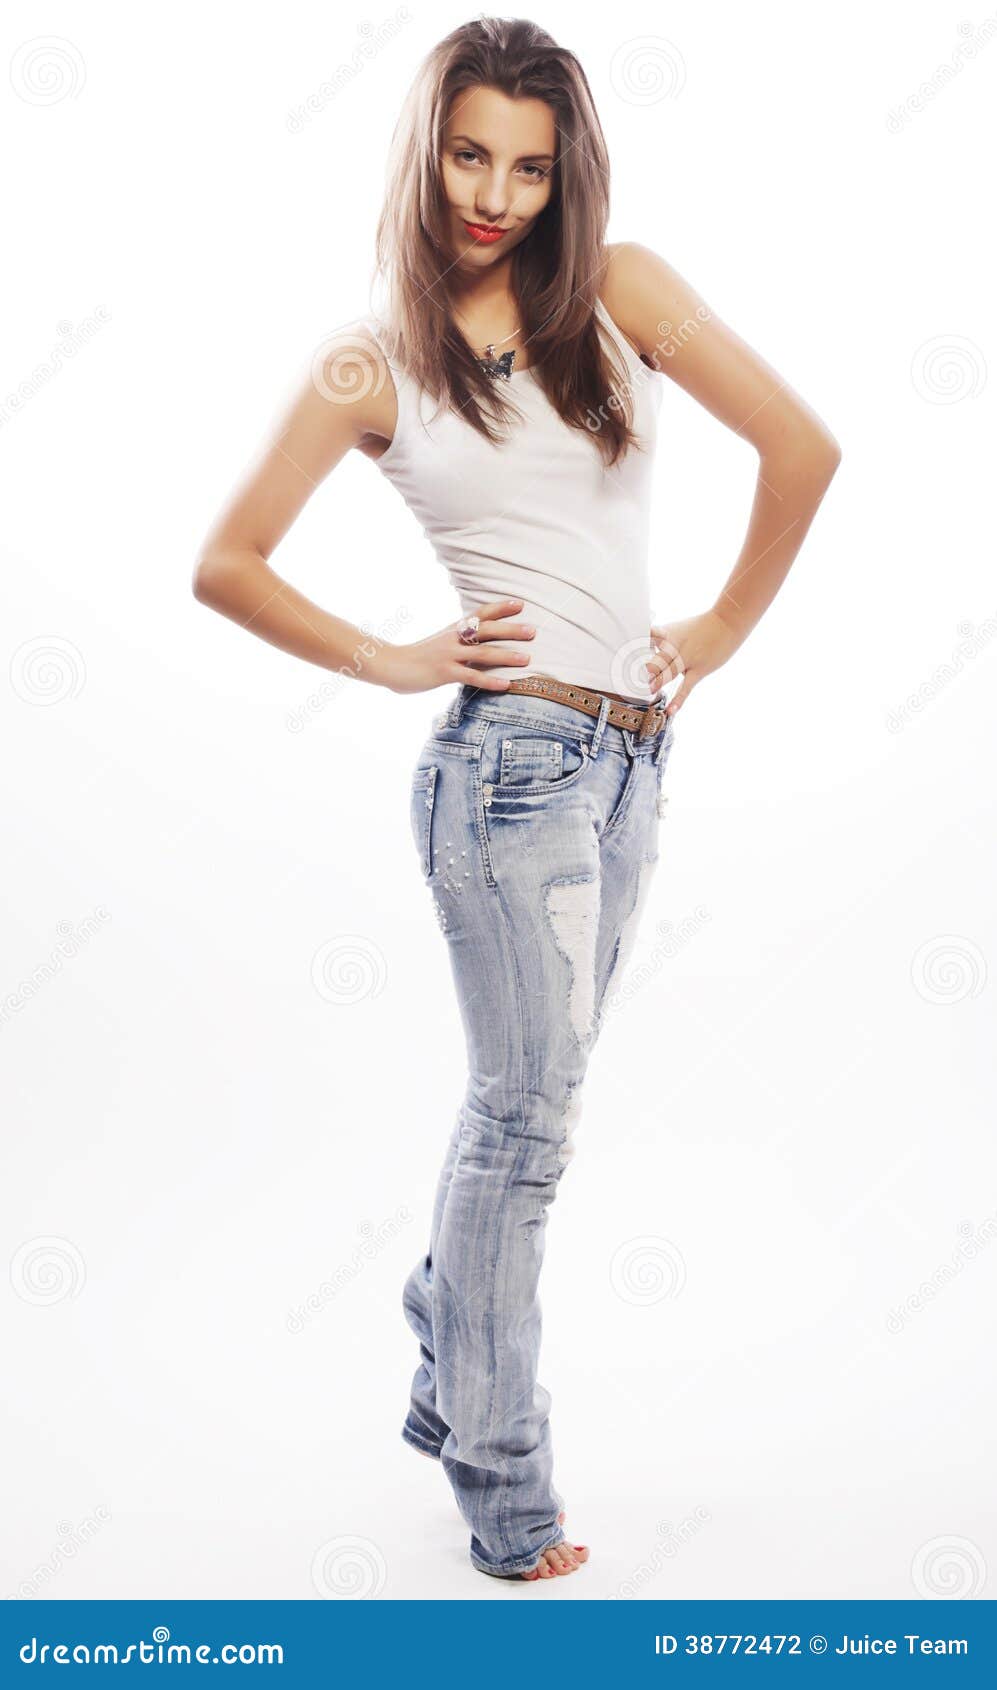 Woman in jeans stock photo. Image of person, caucasian - 38772472